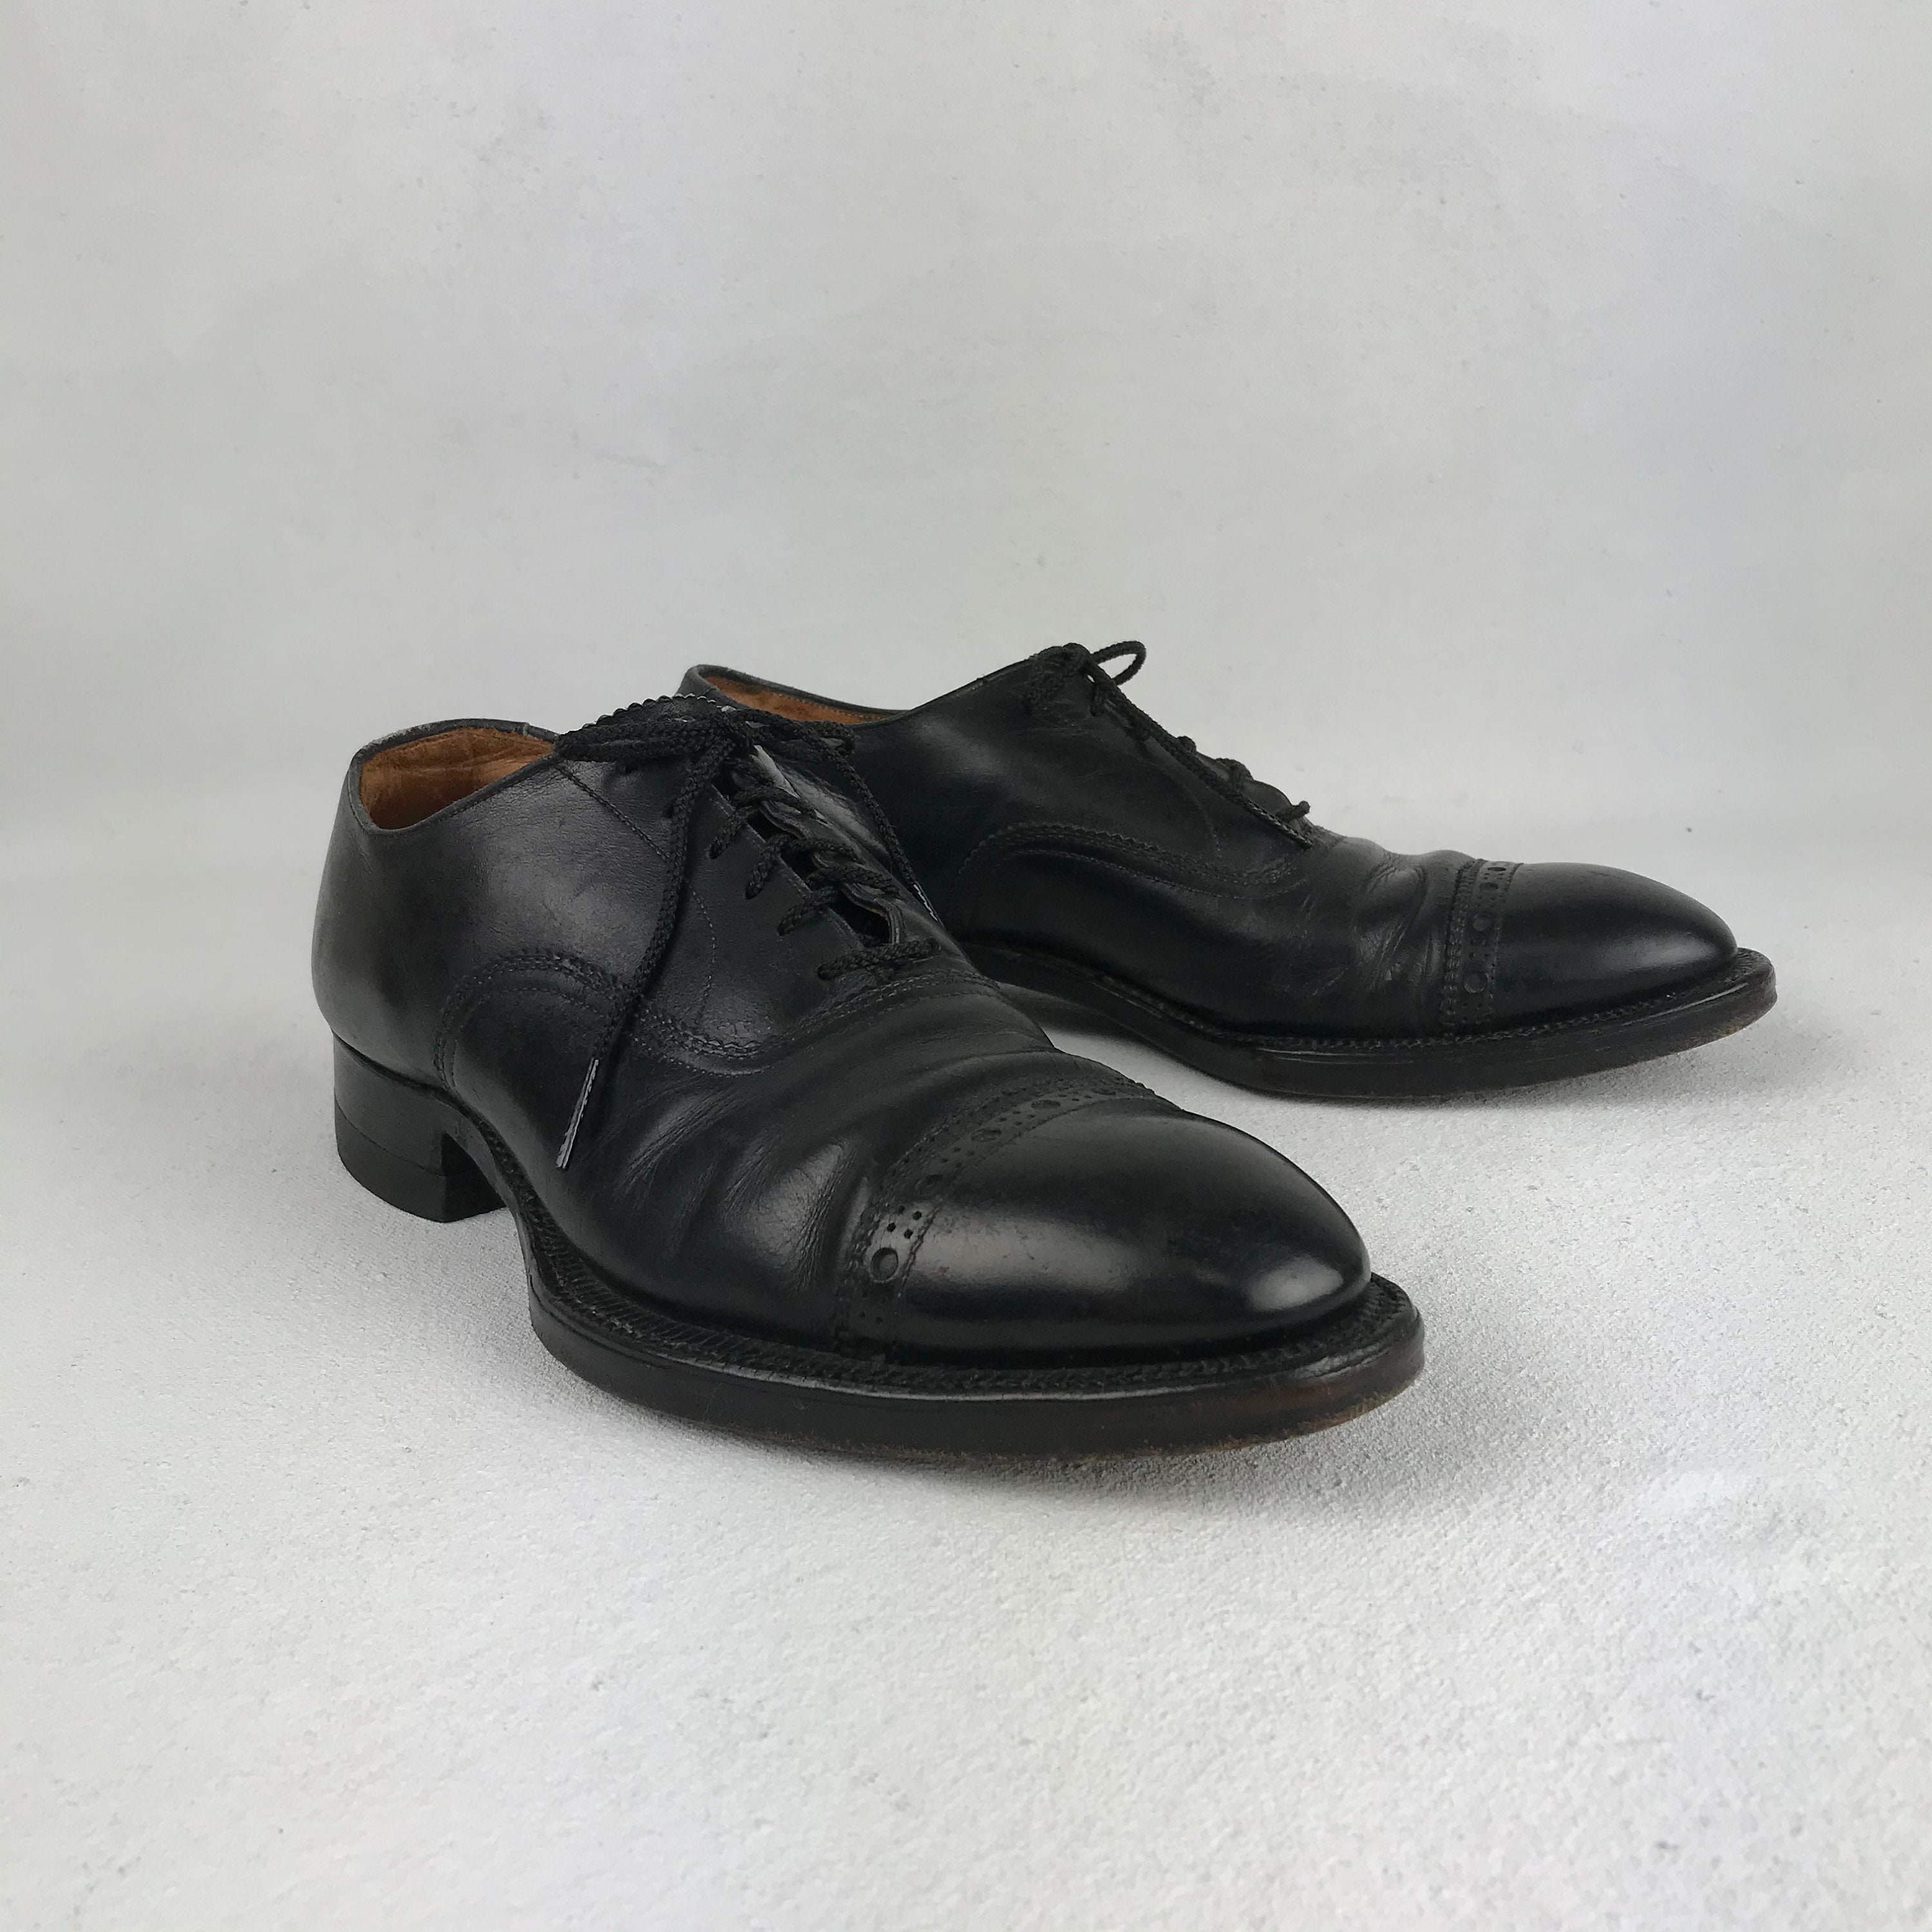 Shoes From The 50s | brebdude.com